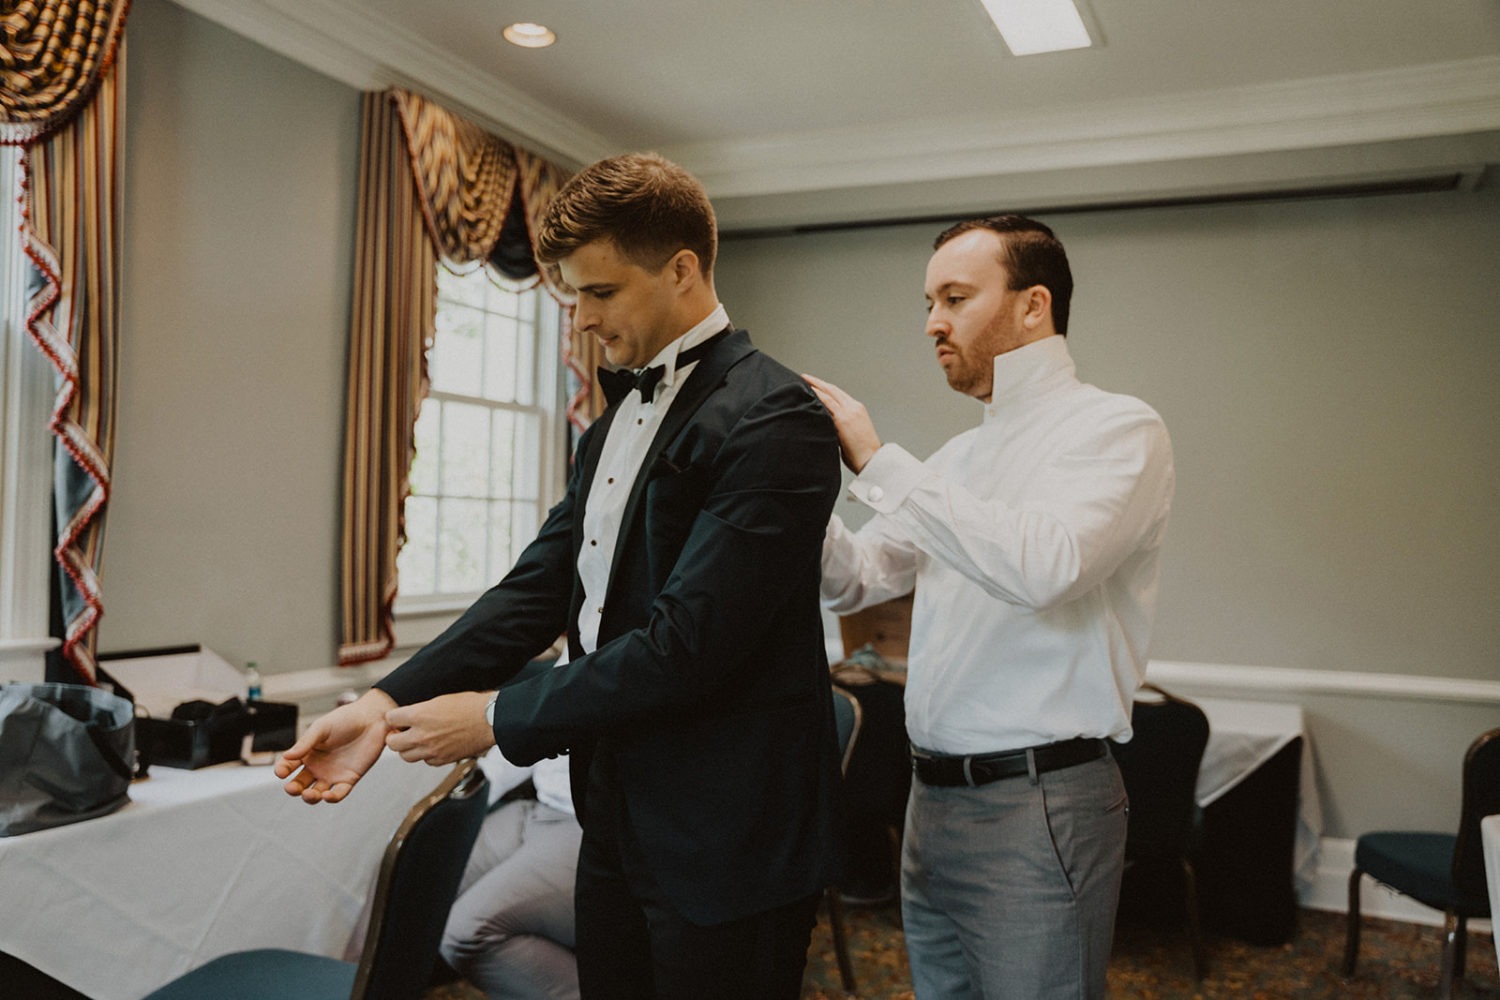 groom gets ready putting on tux jacket